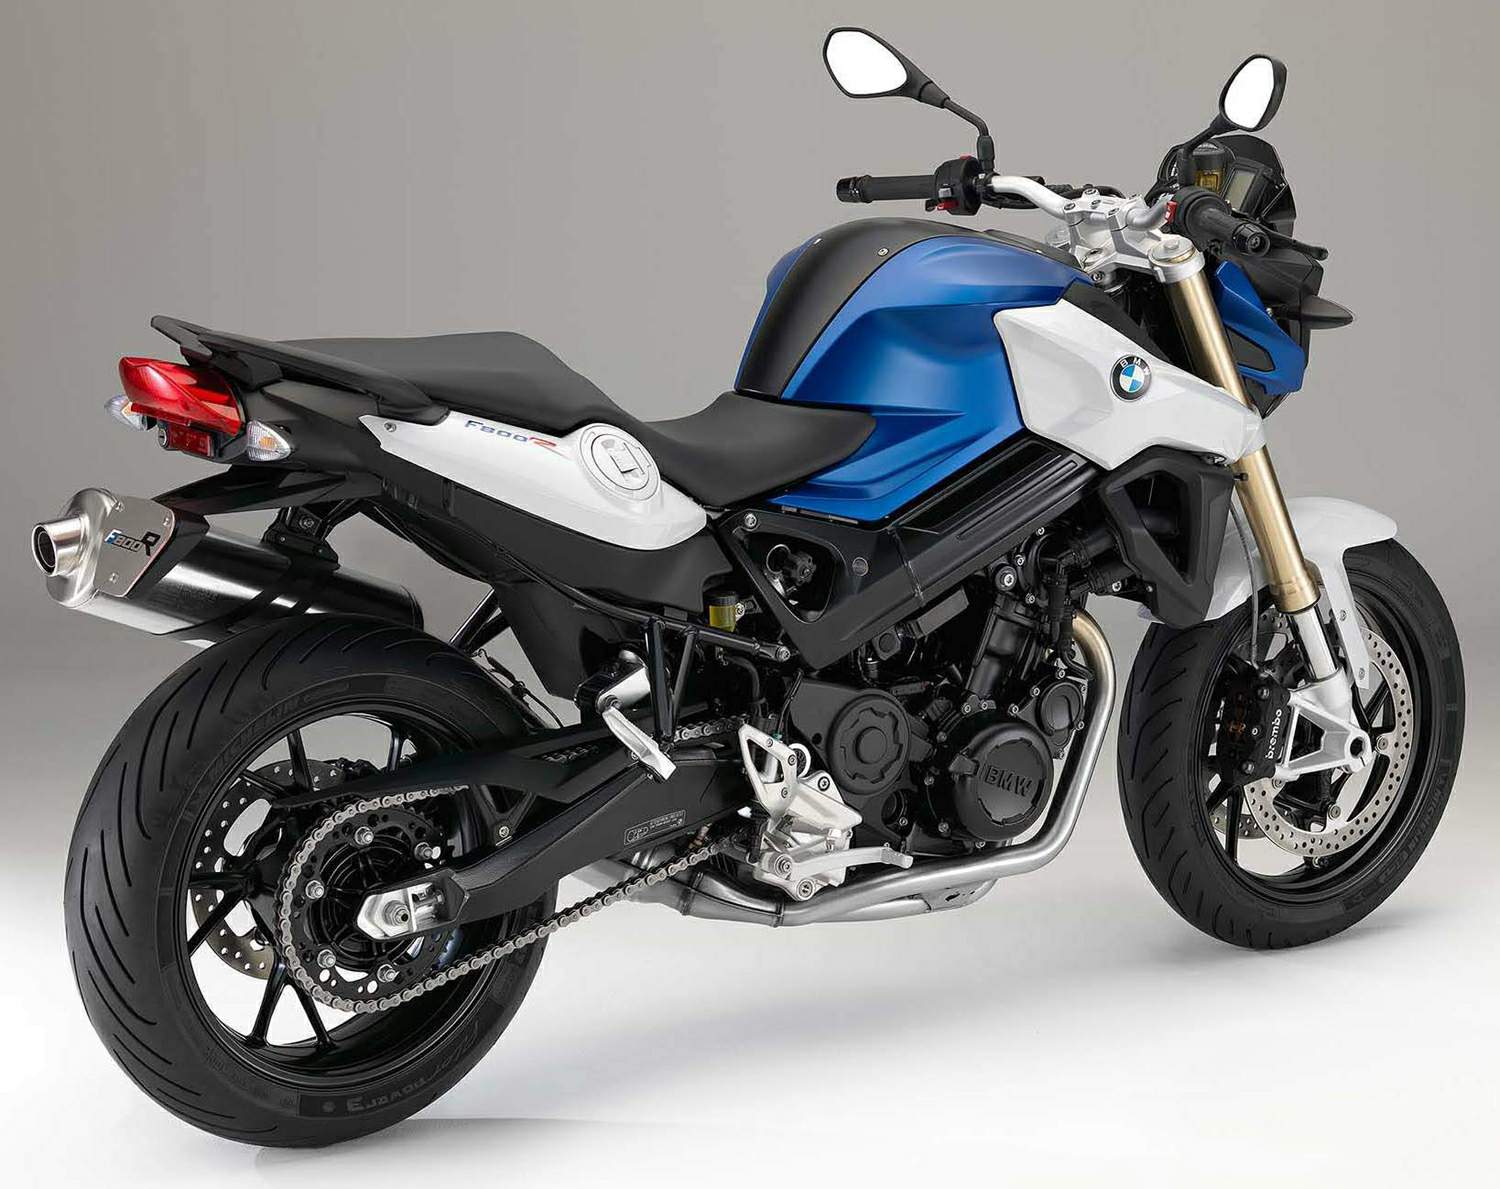 BMW F 800R technical specifications